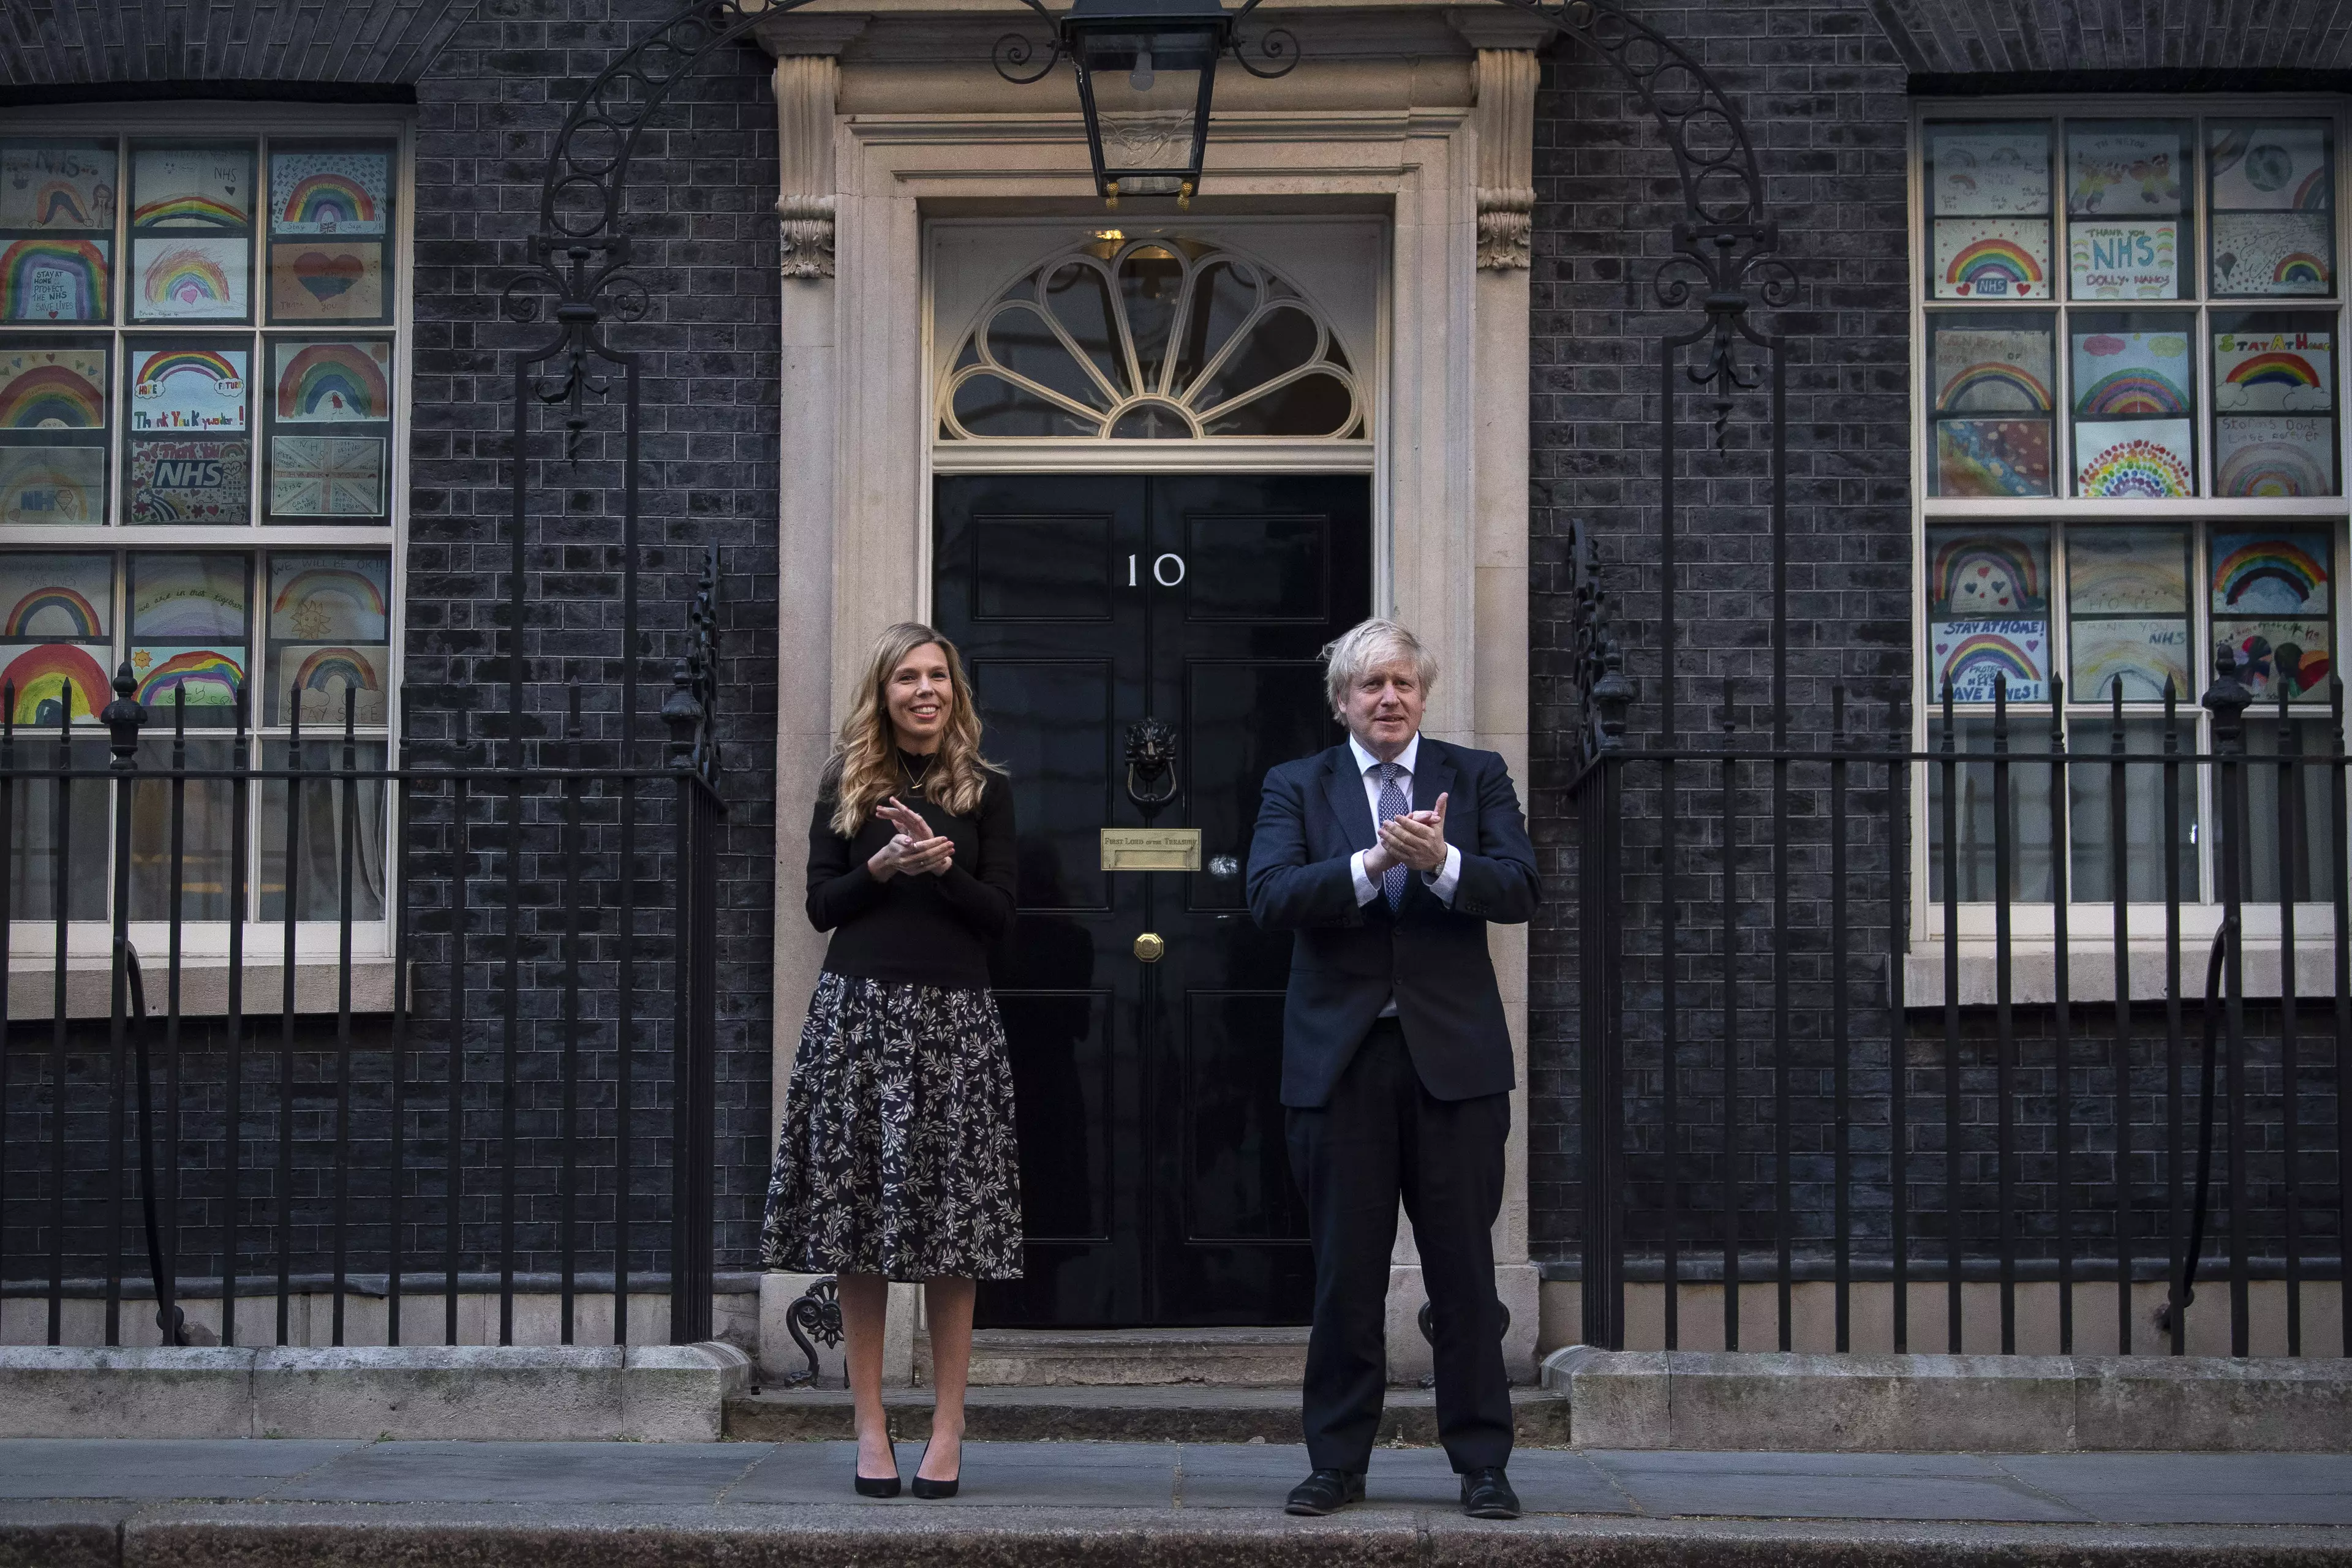 Boris Johnson and his partner Carrie Symonds outside 10 Downing Street in London, joined in the applause to salute local heroes during the nationwide Clap for Carers (